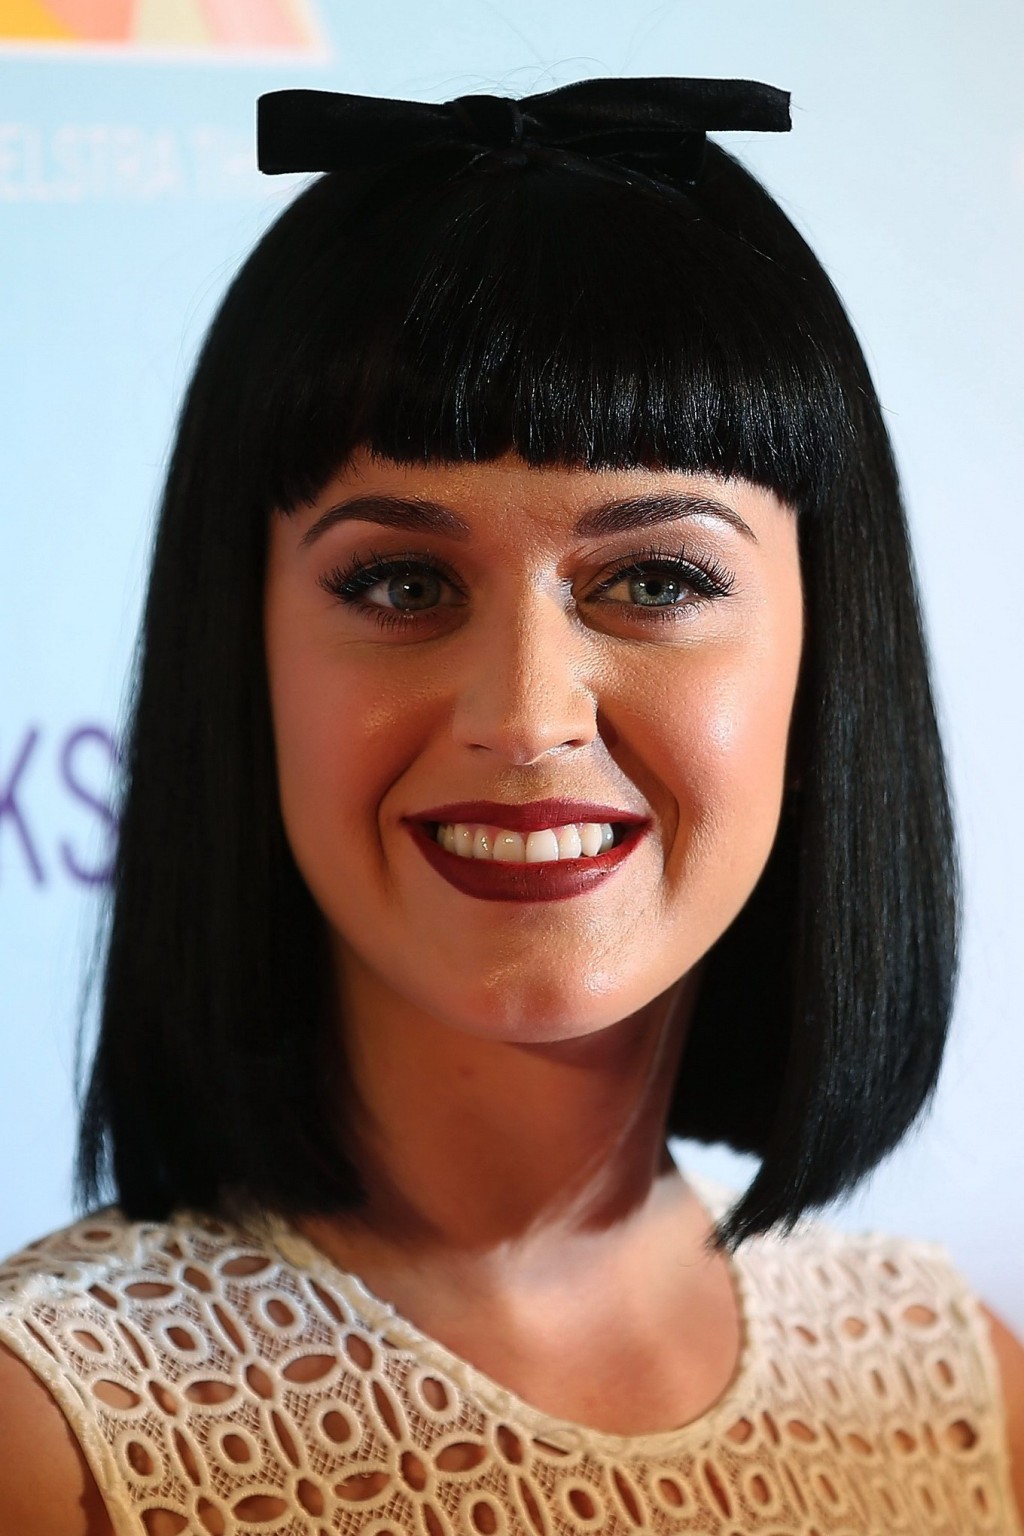 Katy Perry busty wearing a partially see through dress at Telstra in Sydney #75202992